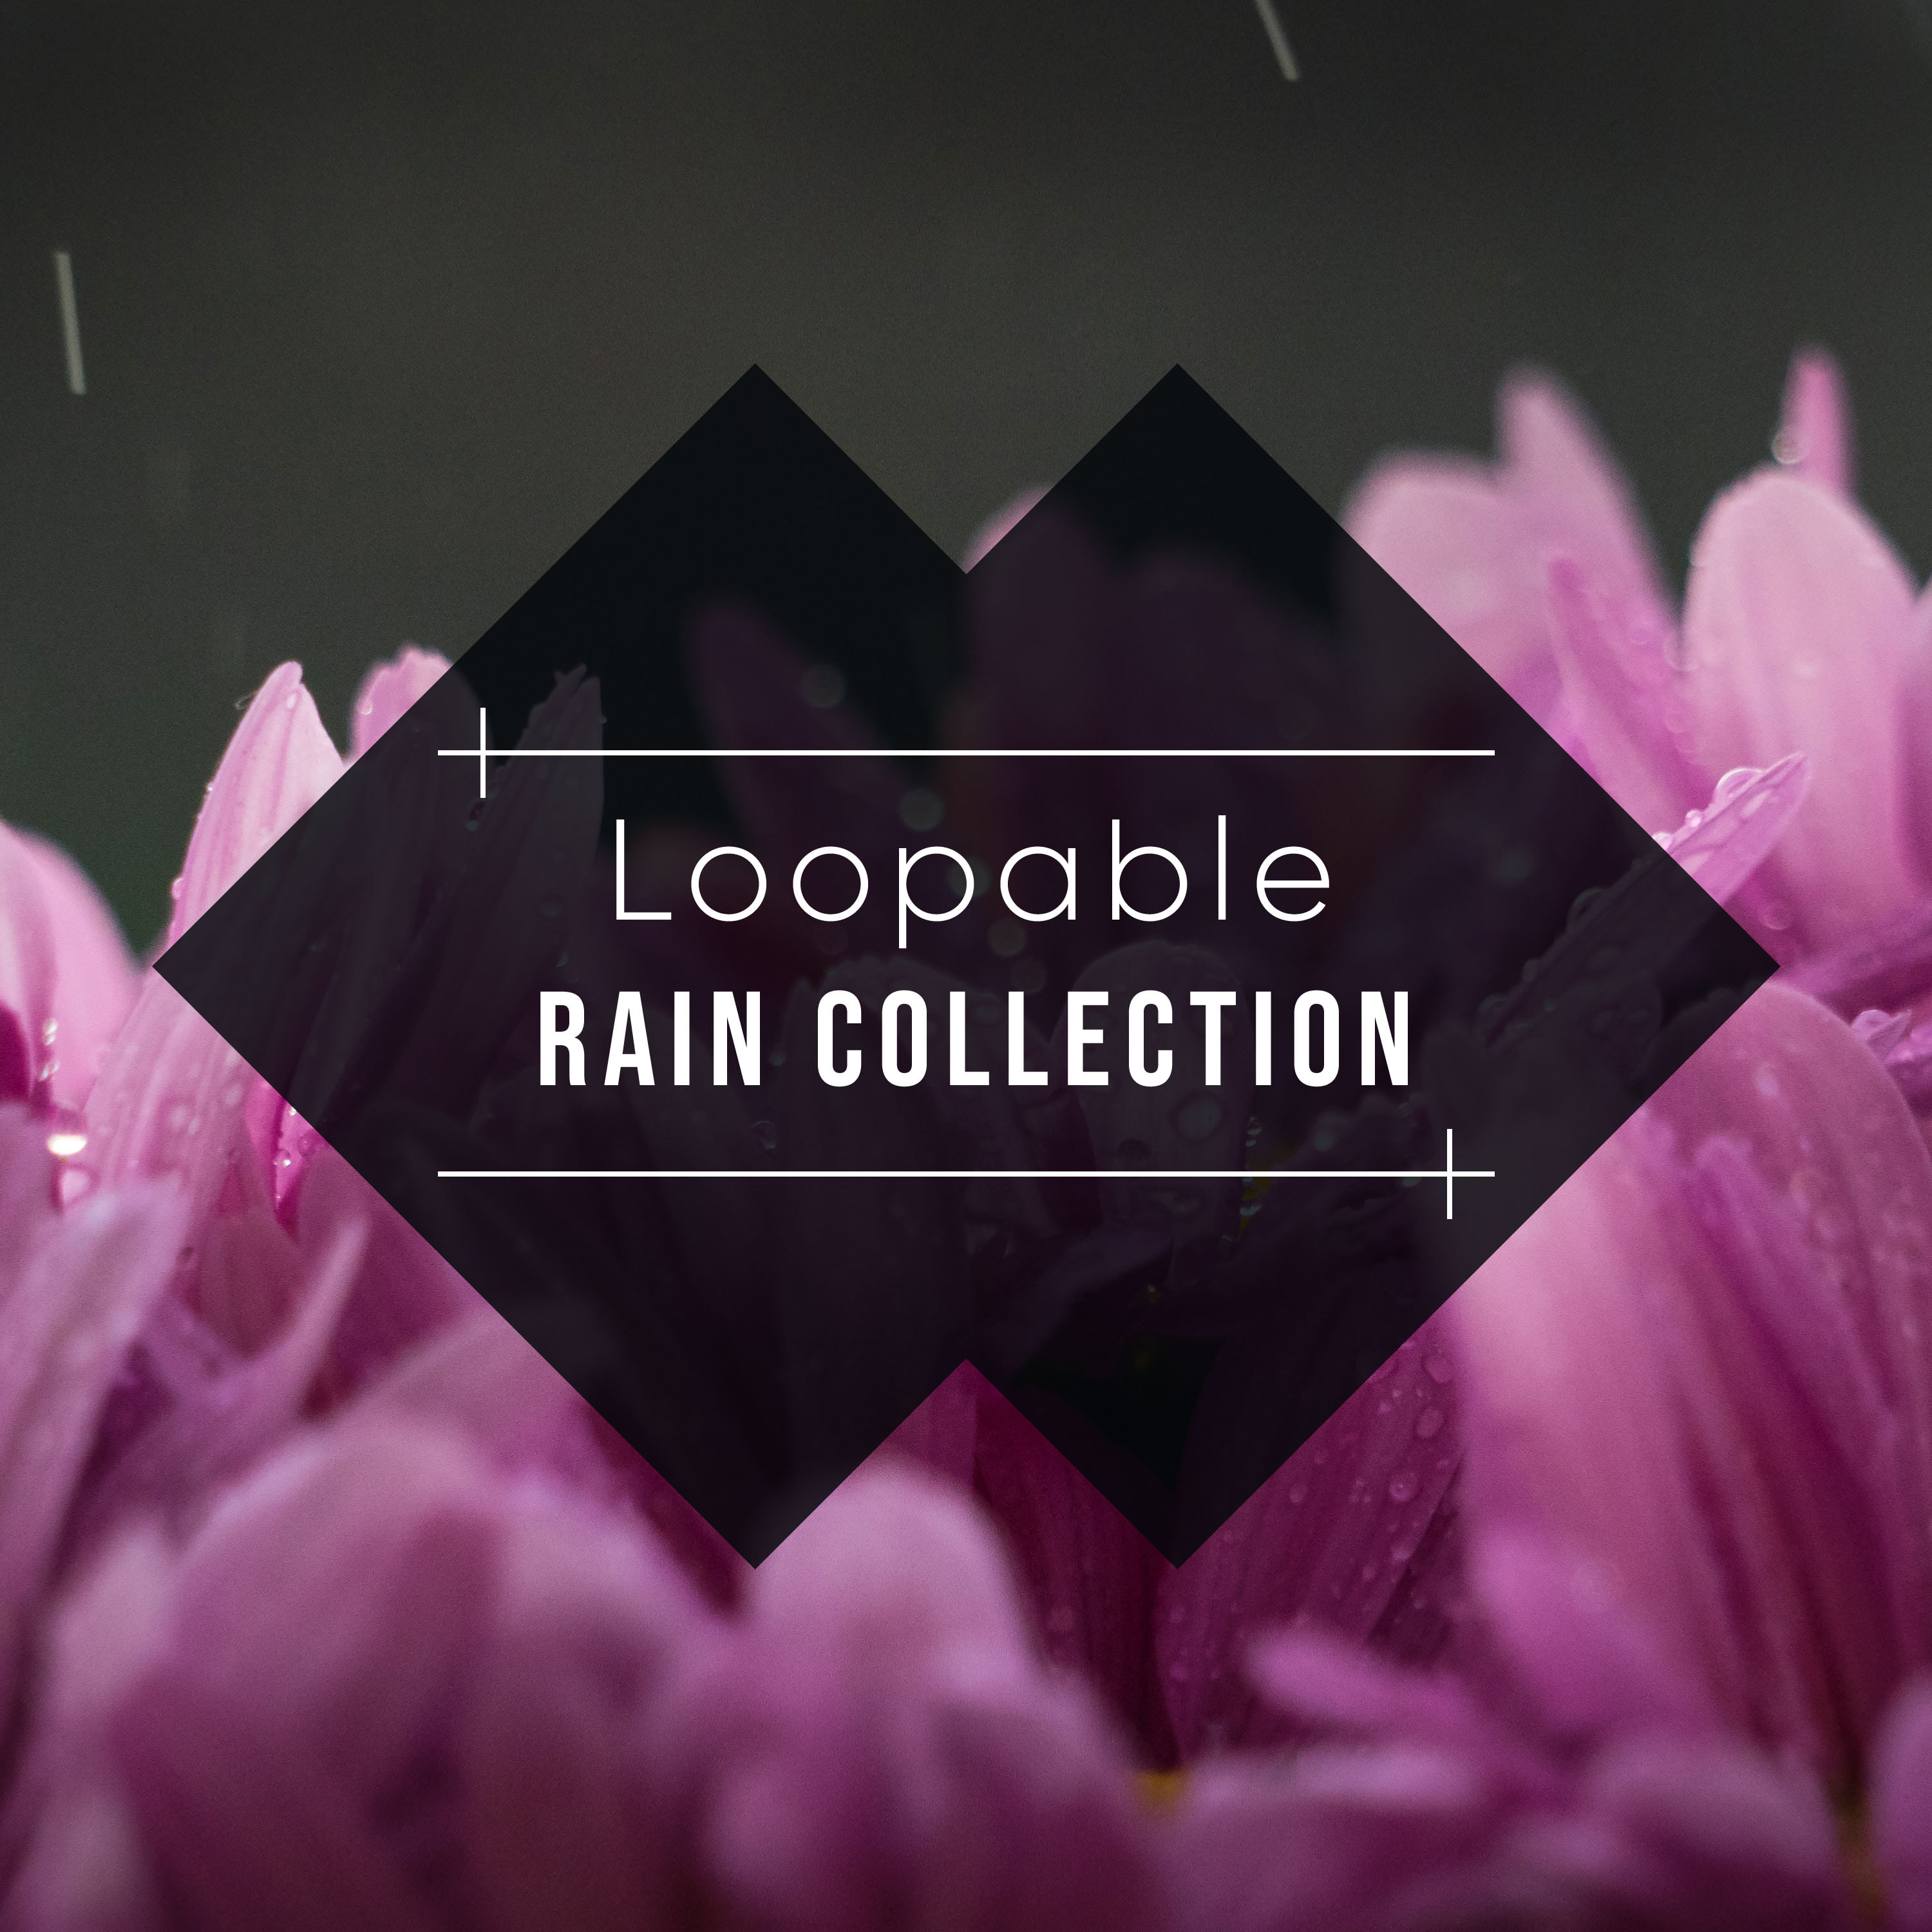 #20 Loopable Rain Collection as White Noise for Meditation & Massage